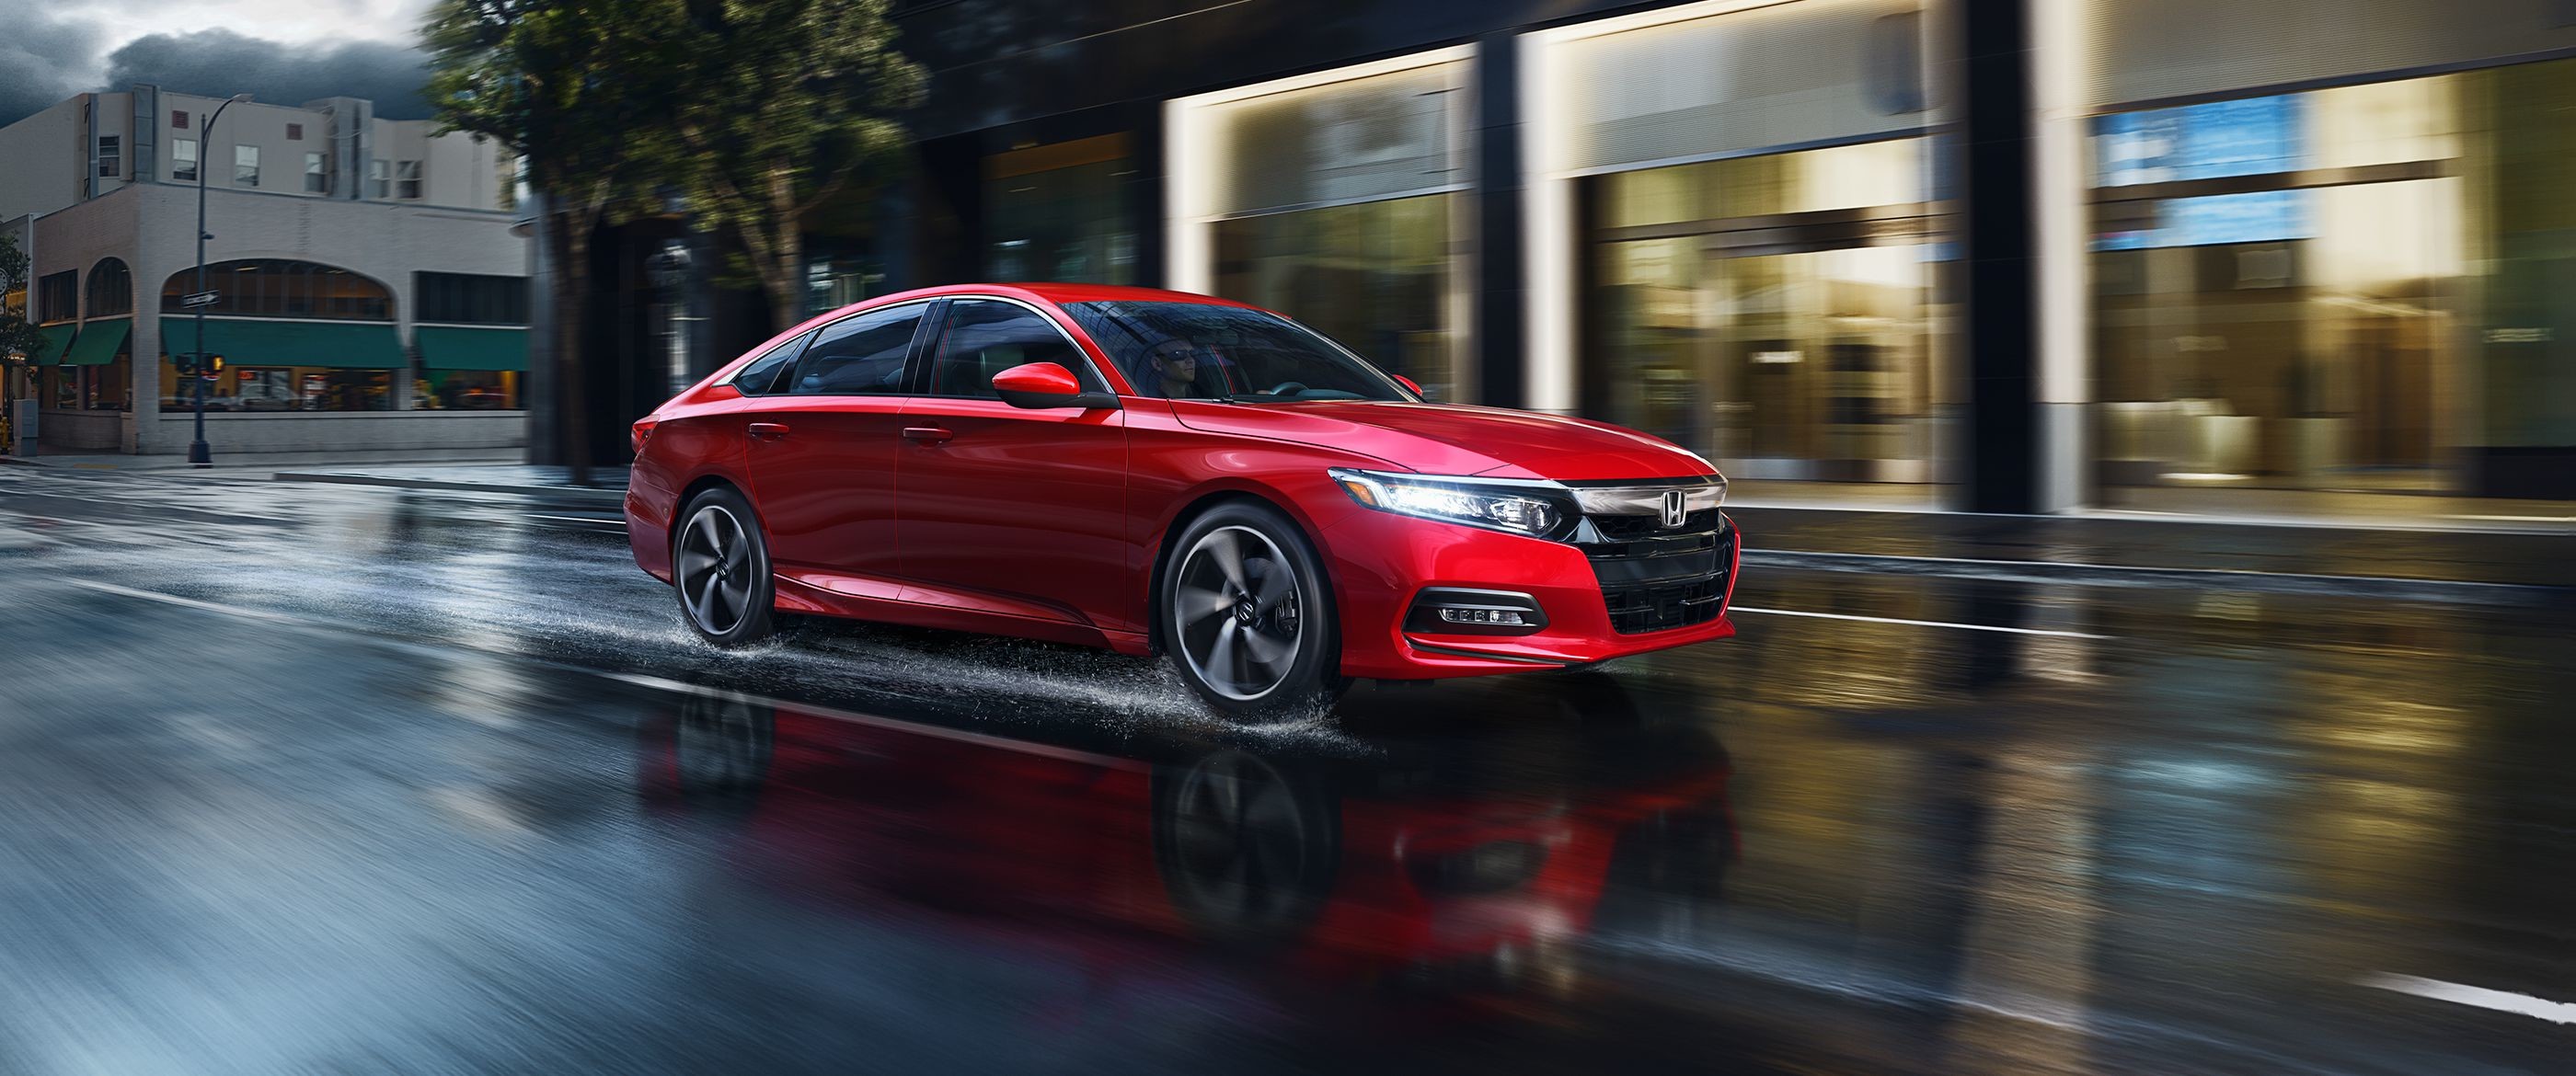 2800x1170 2019 Honda Accord red color side view on highway in city in rain water on  road